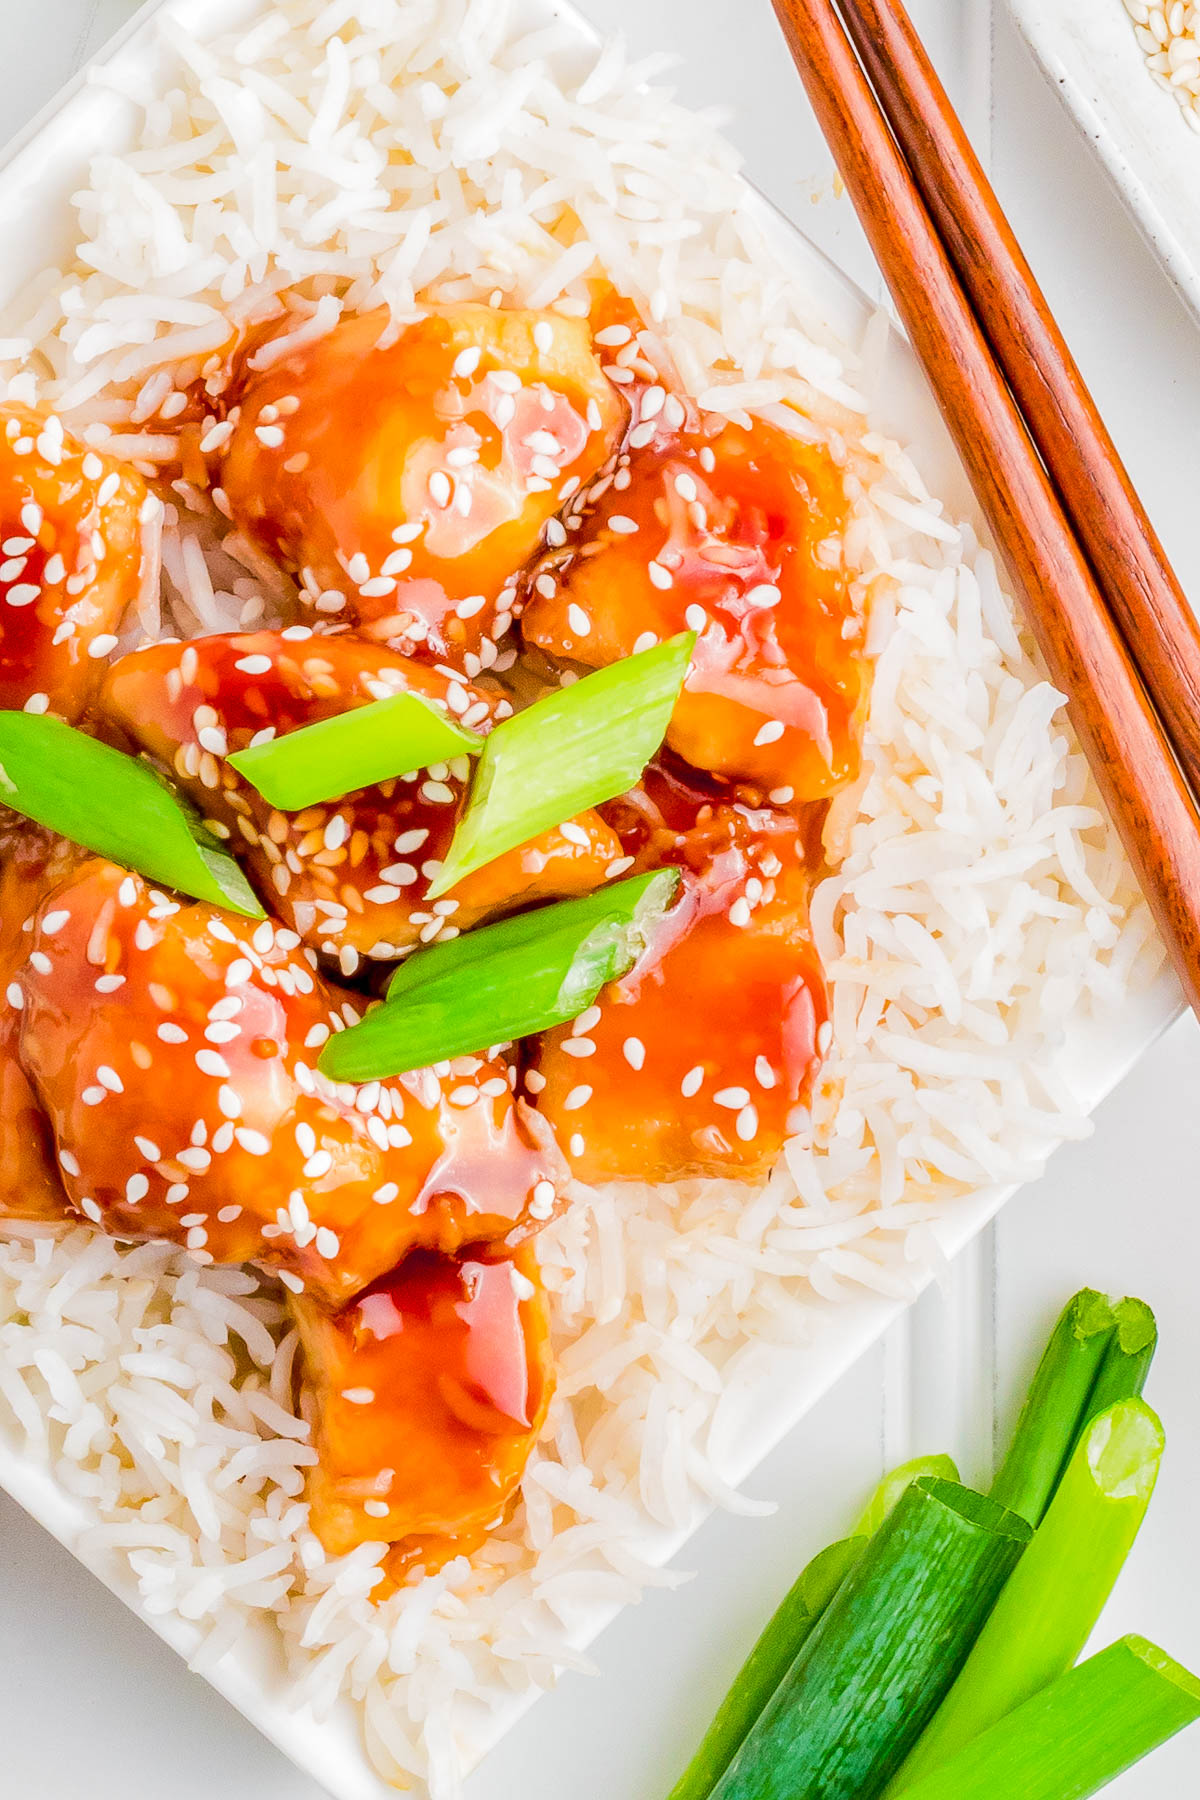 A plate of white rice topped with pieces of chicken glazed in an sauce garnished with white sesame seeds and sliced green onions. Chopsticks rest on the side.